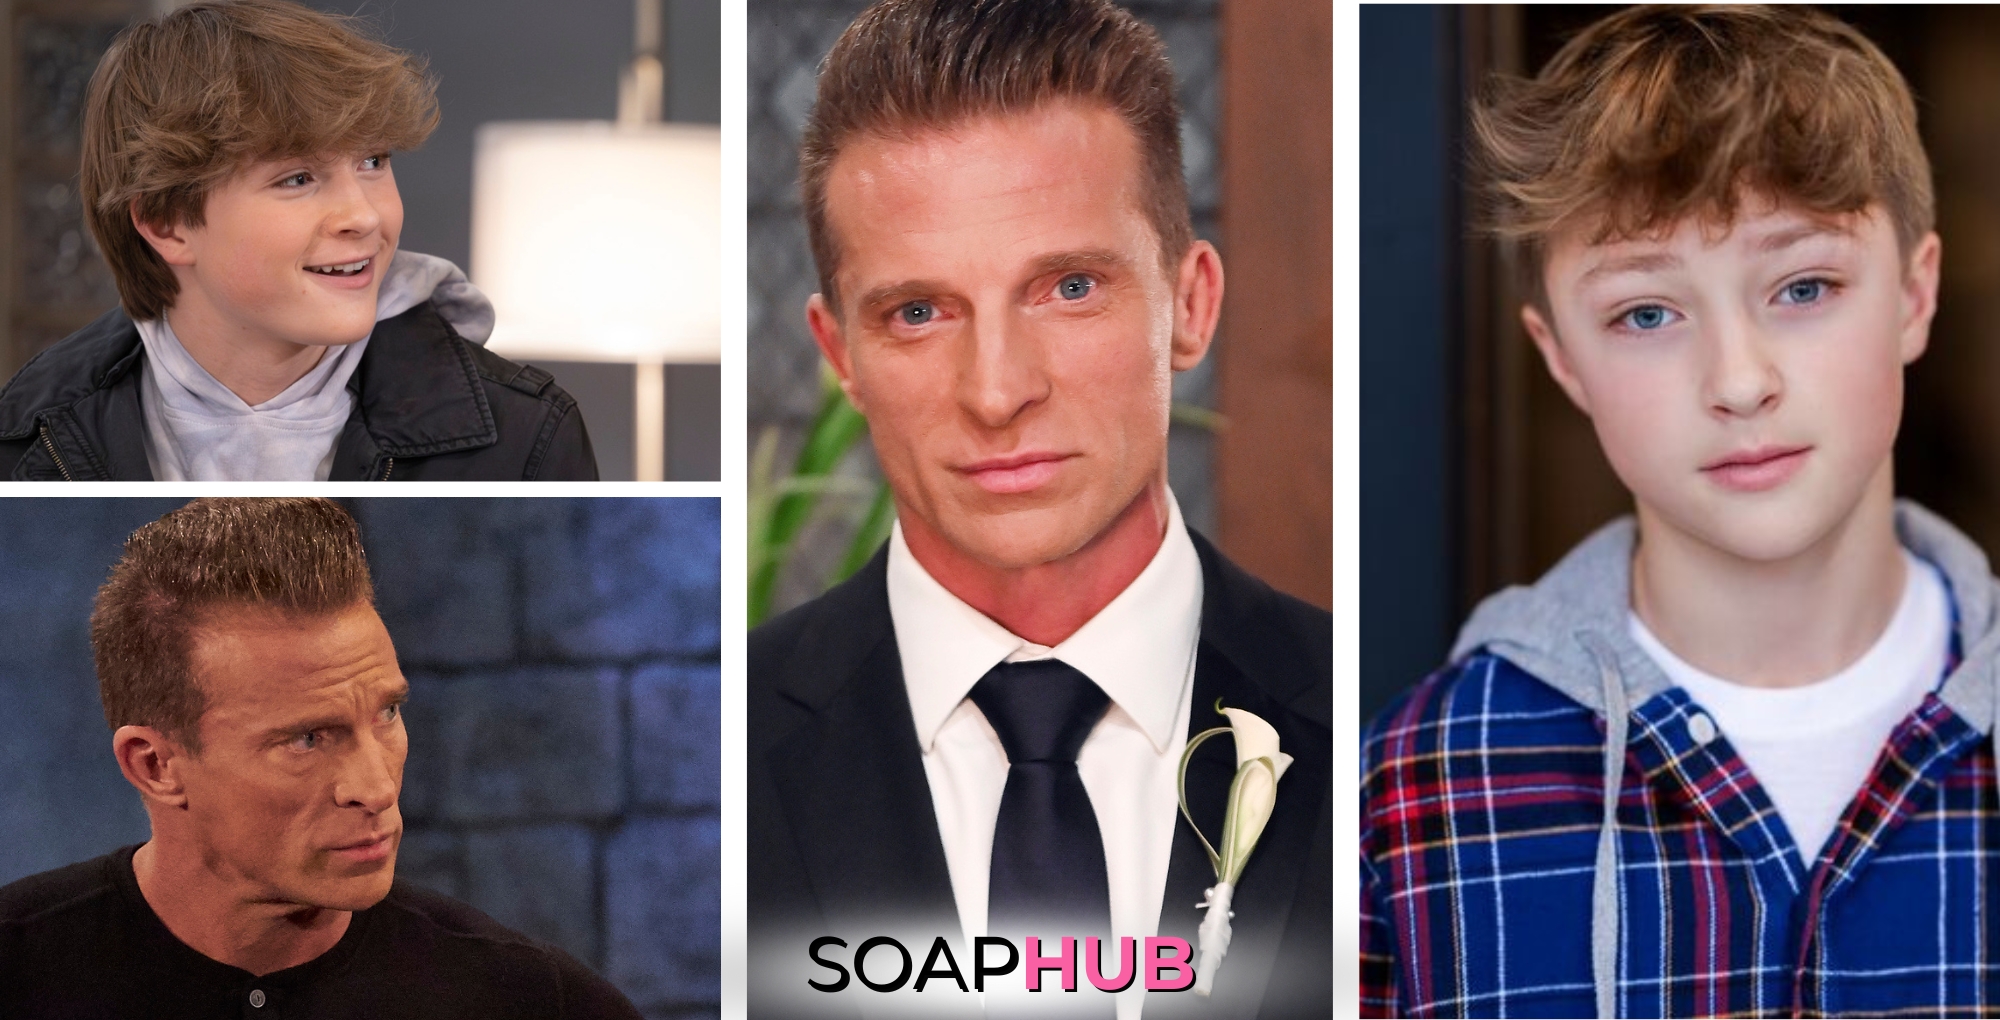 GH’s Asher Antonyzyn Dishes on His Meaningful Relationship with Steve Burton